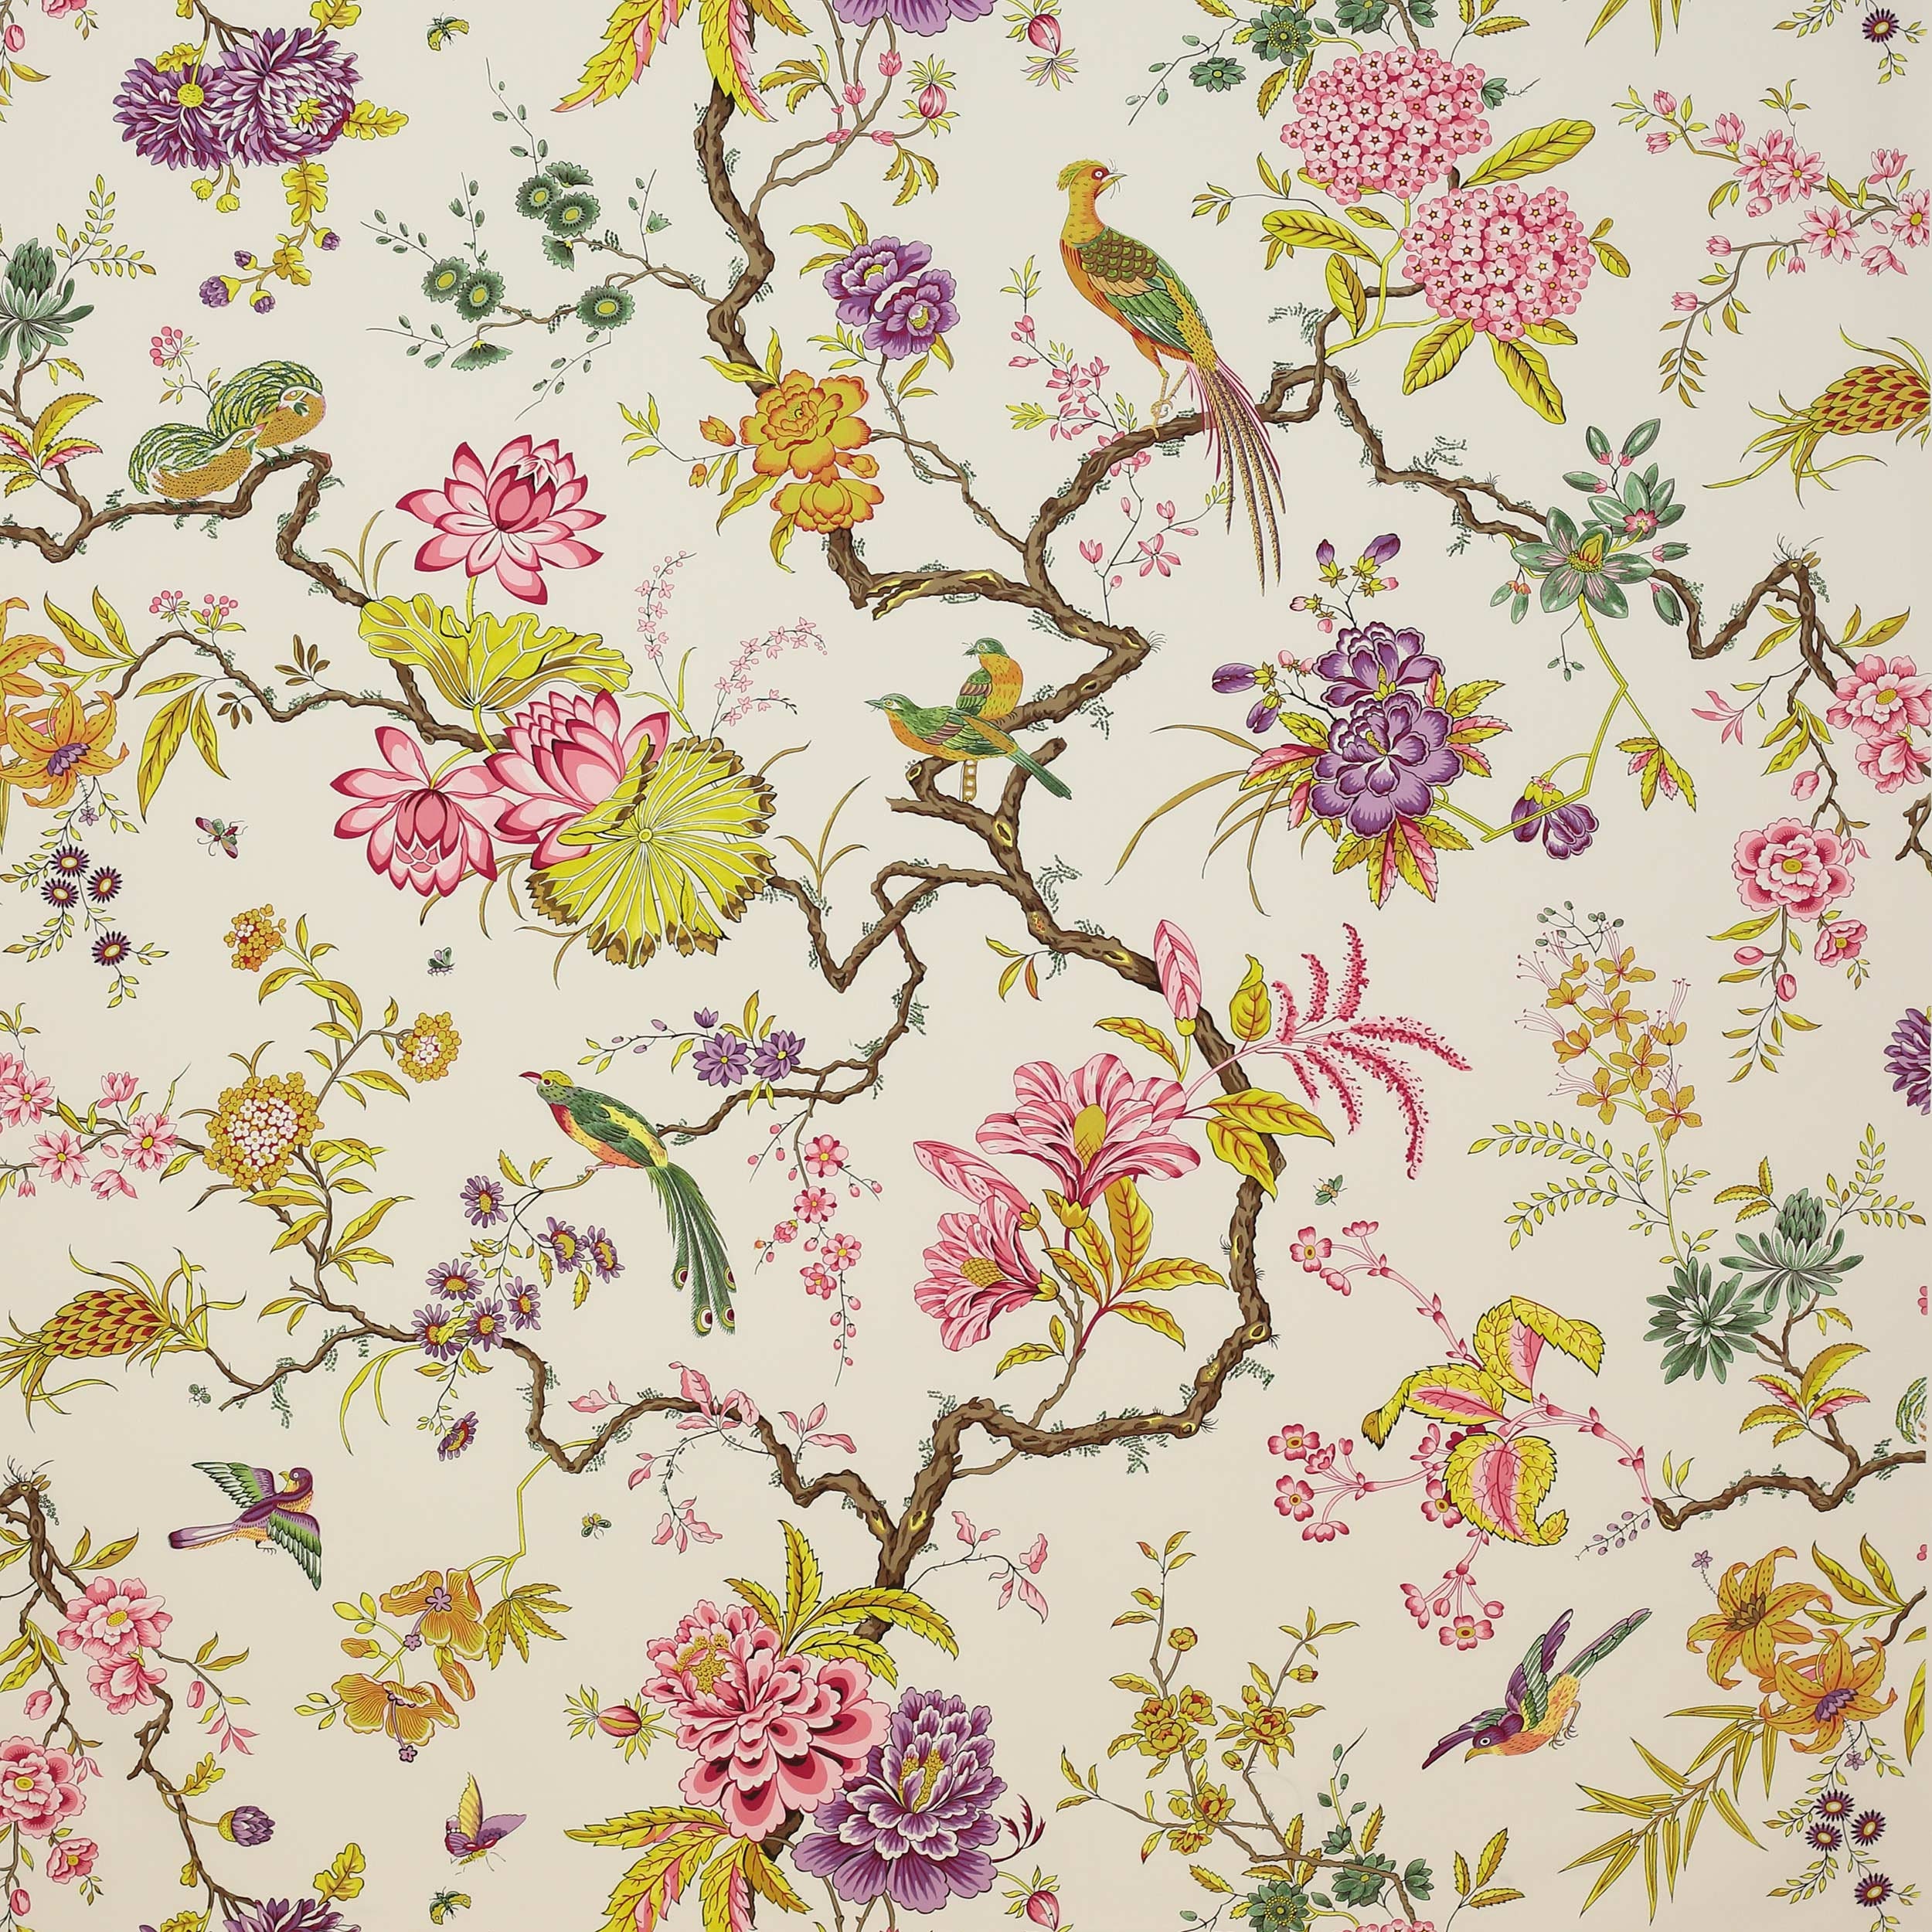 Details about   MANUEL CANOVAS TREE OF LIFE PHEASANTS & FLORAL FABRIC 10 YARDS ROSE PURPLE MULTI 